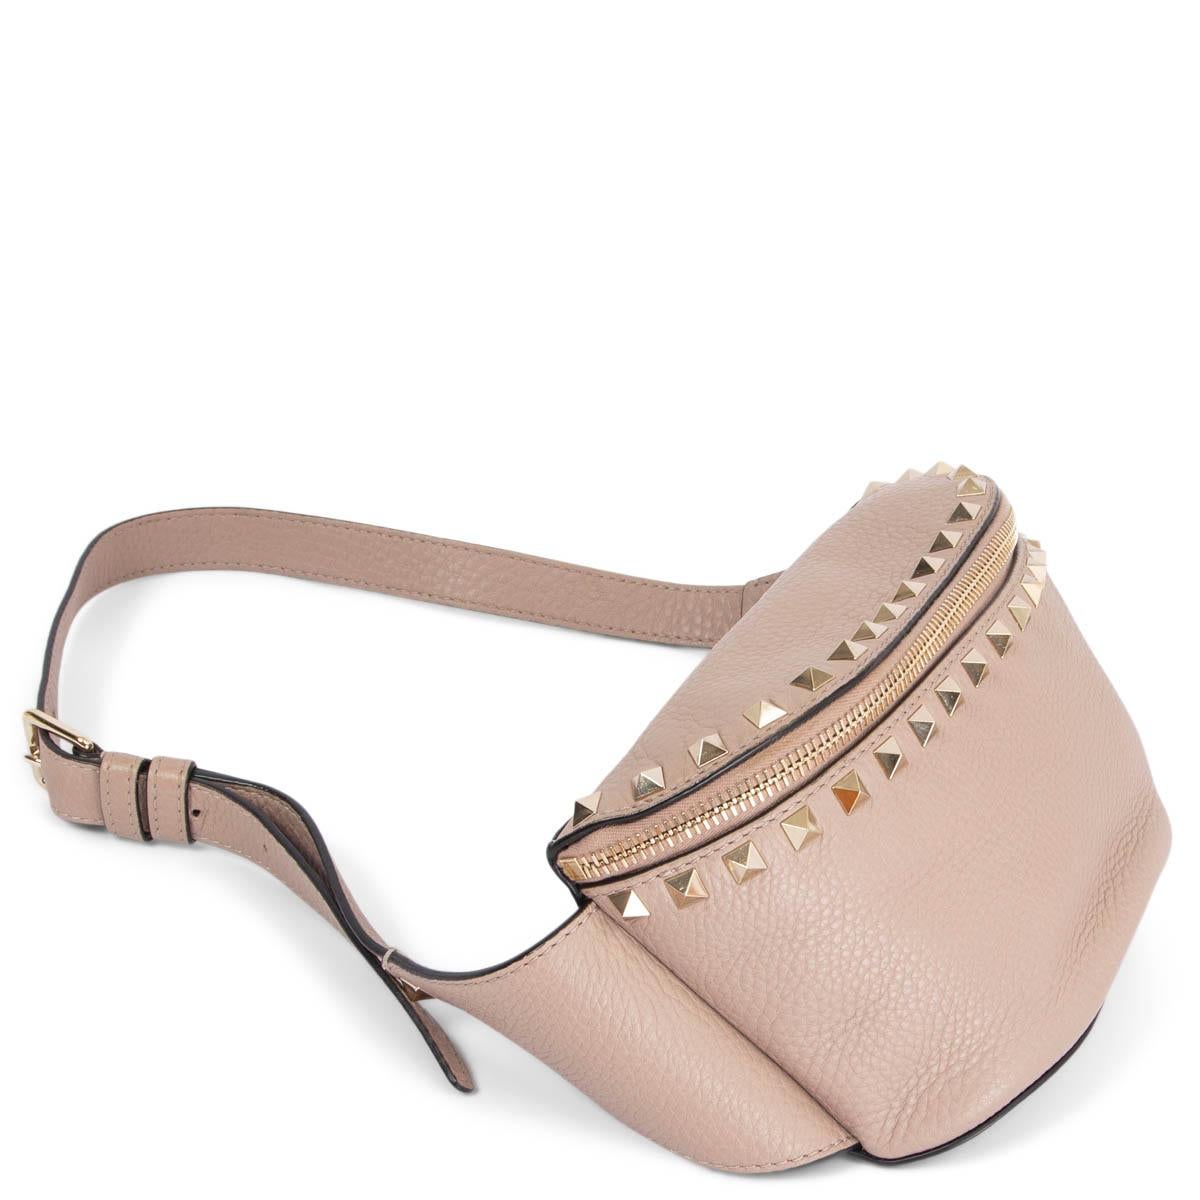 100% authentic Valentino Rockstud belt bag in grainy dusty pink leather featuring signature light gold-tone pyramid studs and a zipper pocket at the back. Opens with a zipper on top and is lined in off-white canvas with a open pocket against the